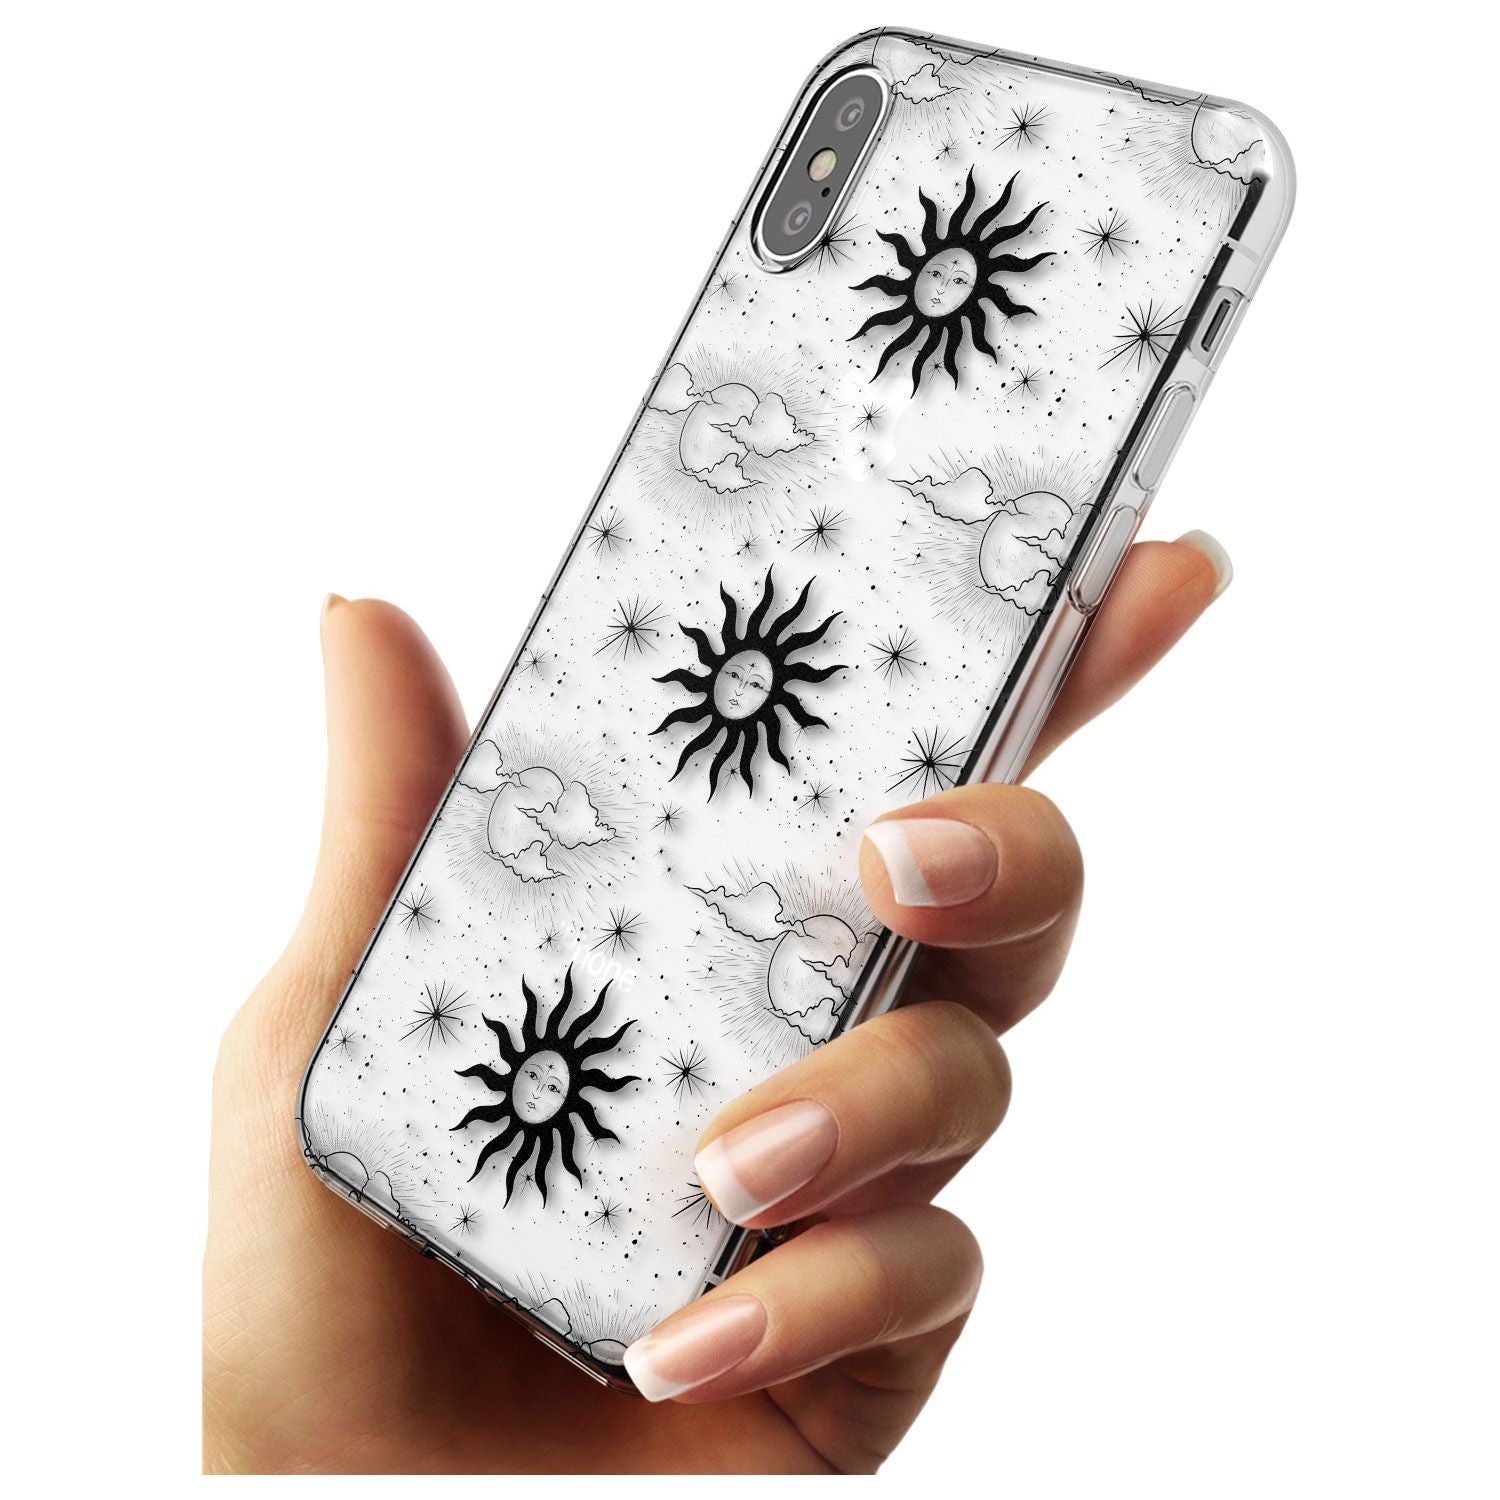 Suns & Clouds Vintage Astrological Slim TPU Phone Case Warehouse X XS Max XR